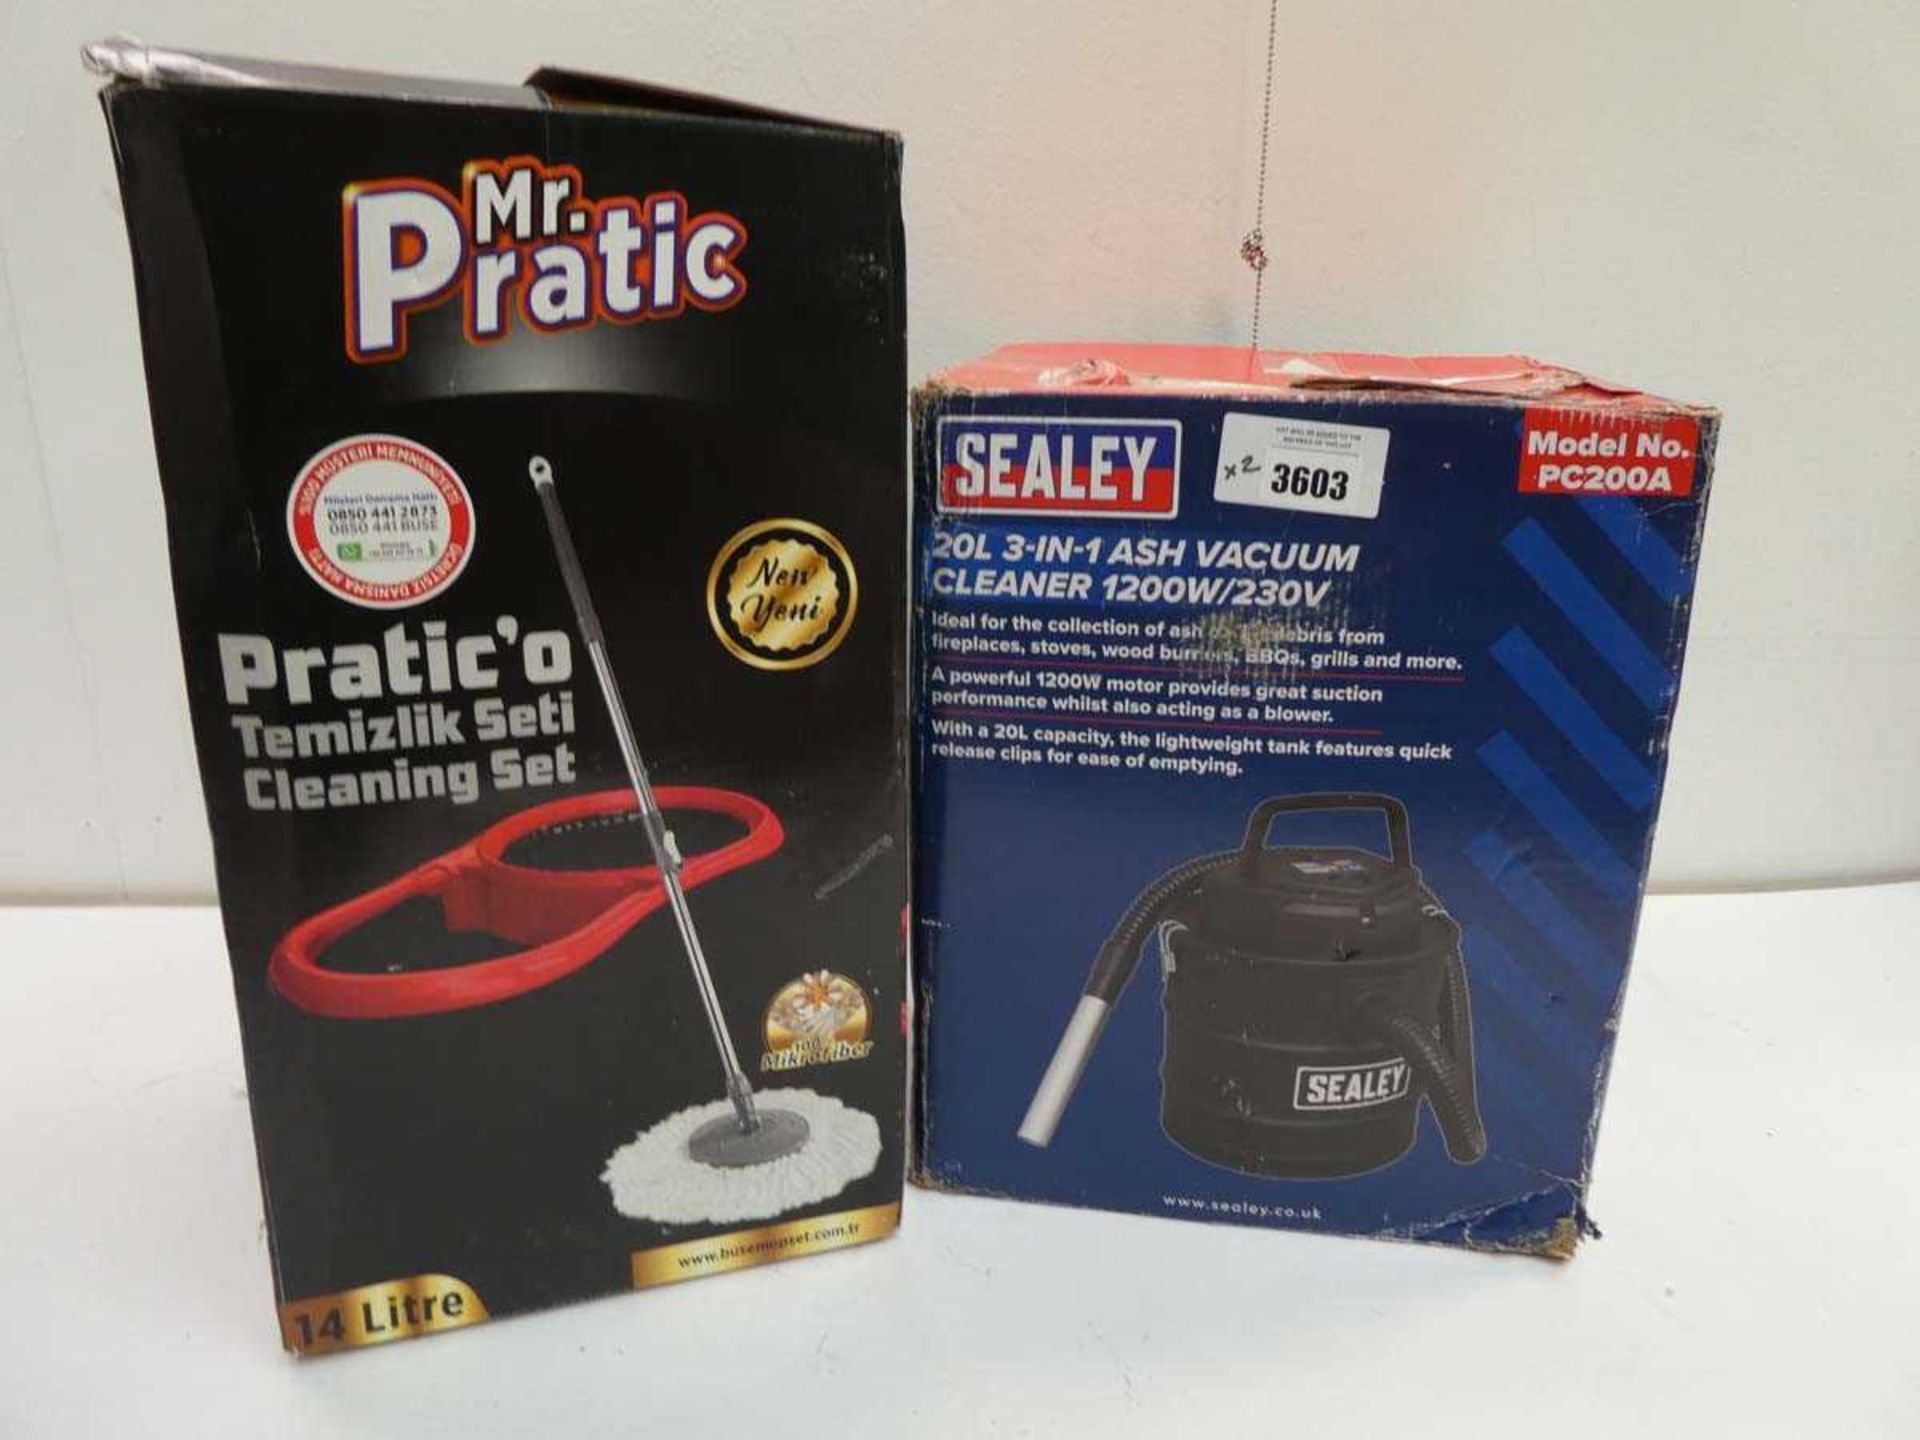 +VAT Sealey 3 in 1 20L ash vacuum cleaner and Mr Pratic cleaning set